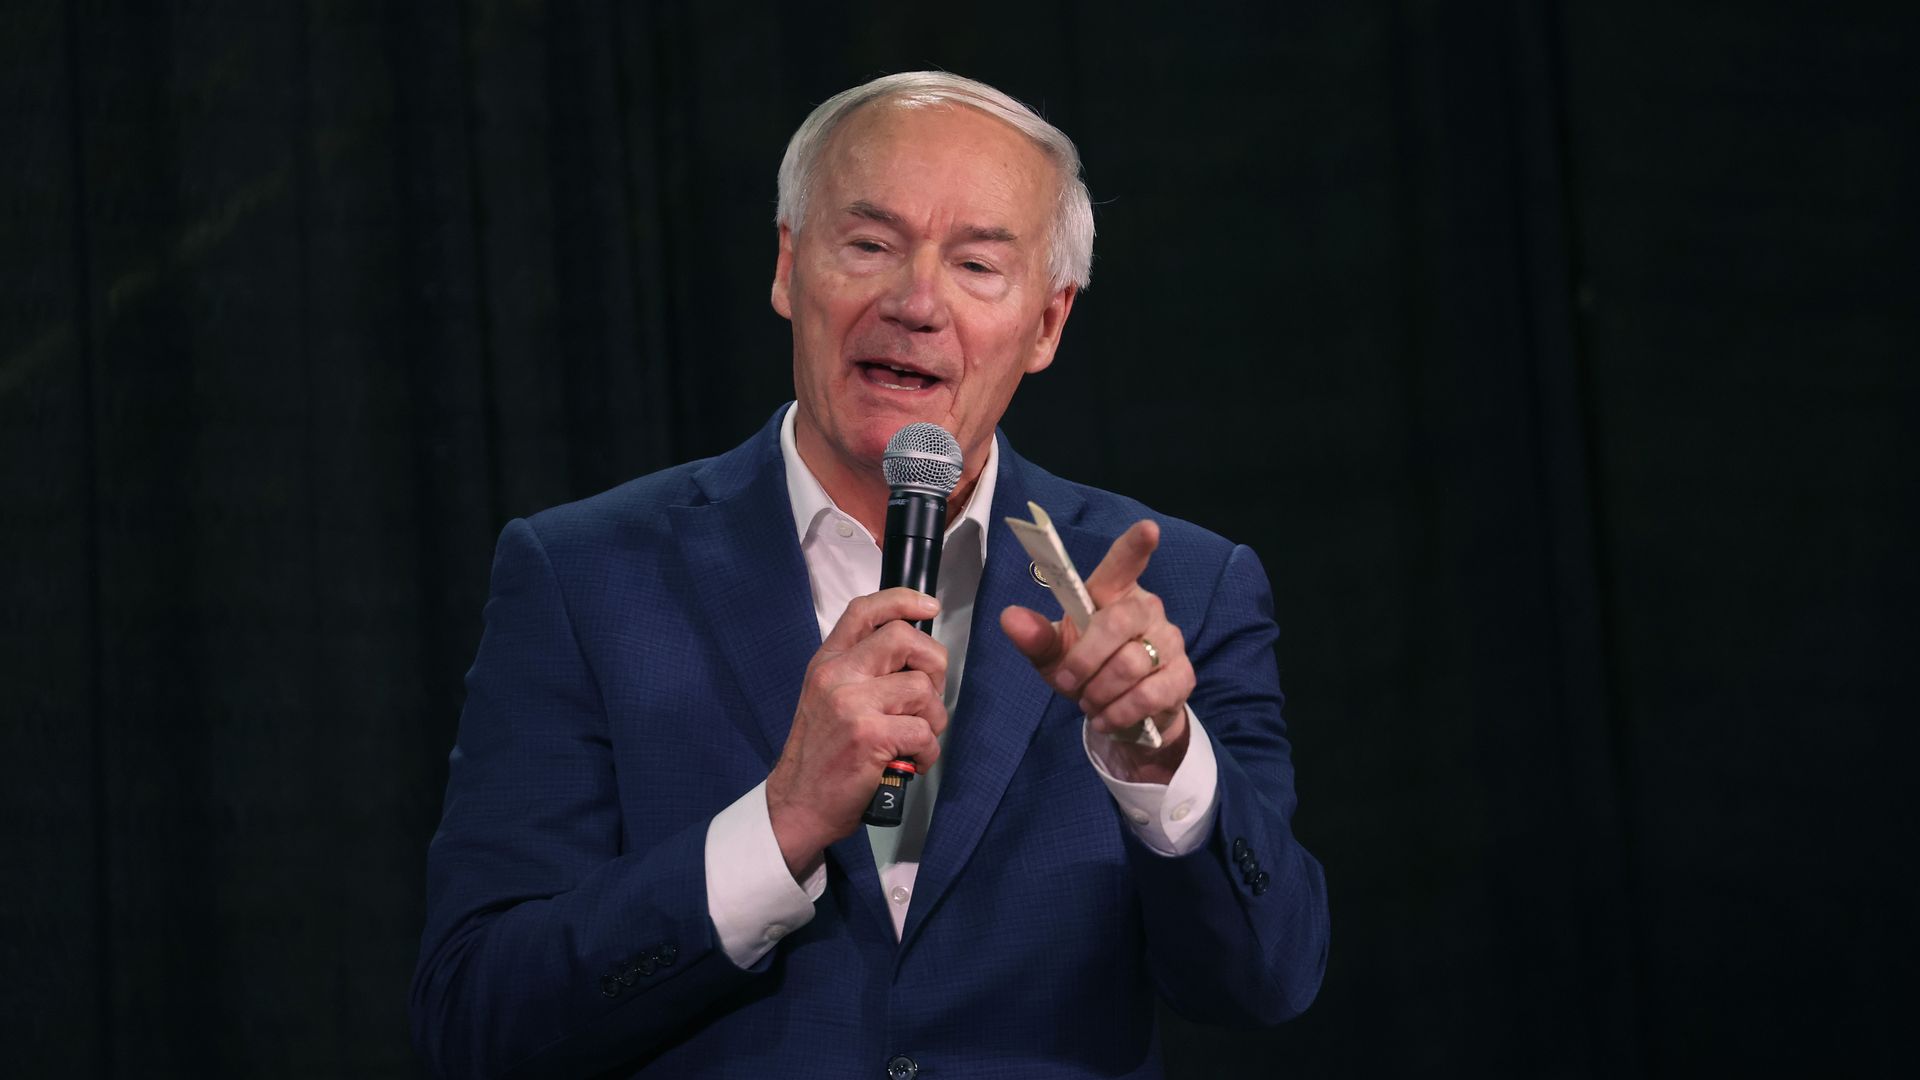 Republican presidential candidate former Arkansas Governor Asa Hutchinson speaks to guests at the third annual MMM Tailgate celebration hosted by U.S. Rep. Mariannette Miller-Meeks (R-IA) on October 20, 2023 in Iowa City, Iowa.